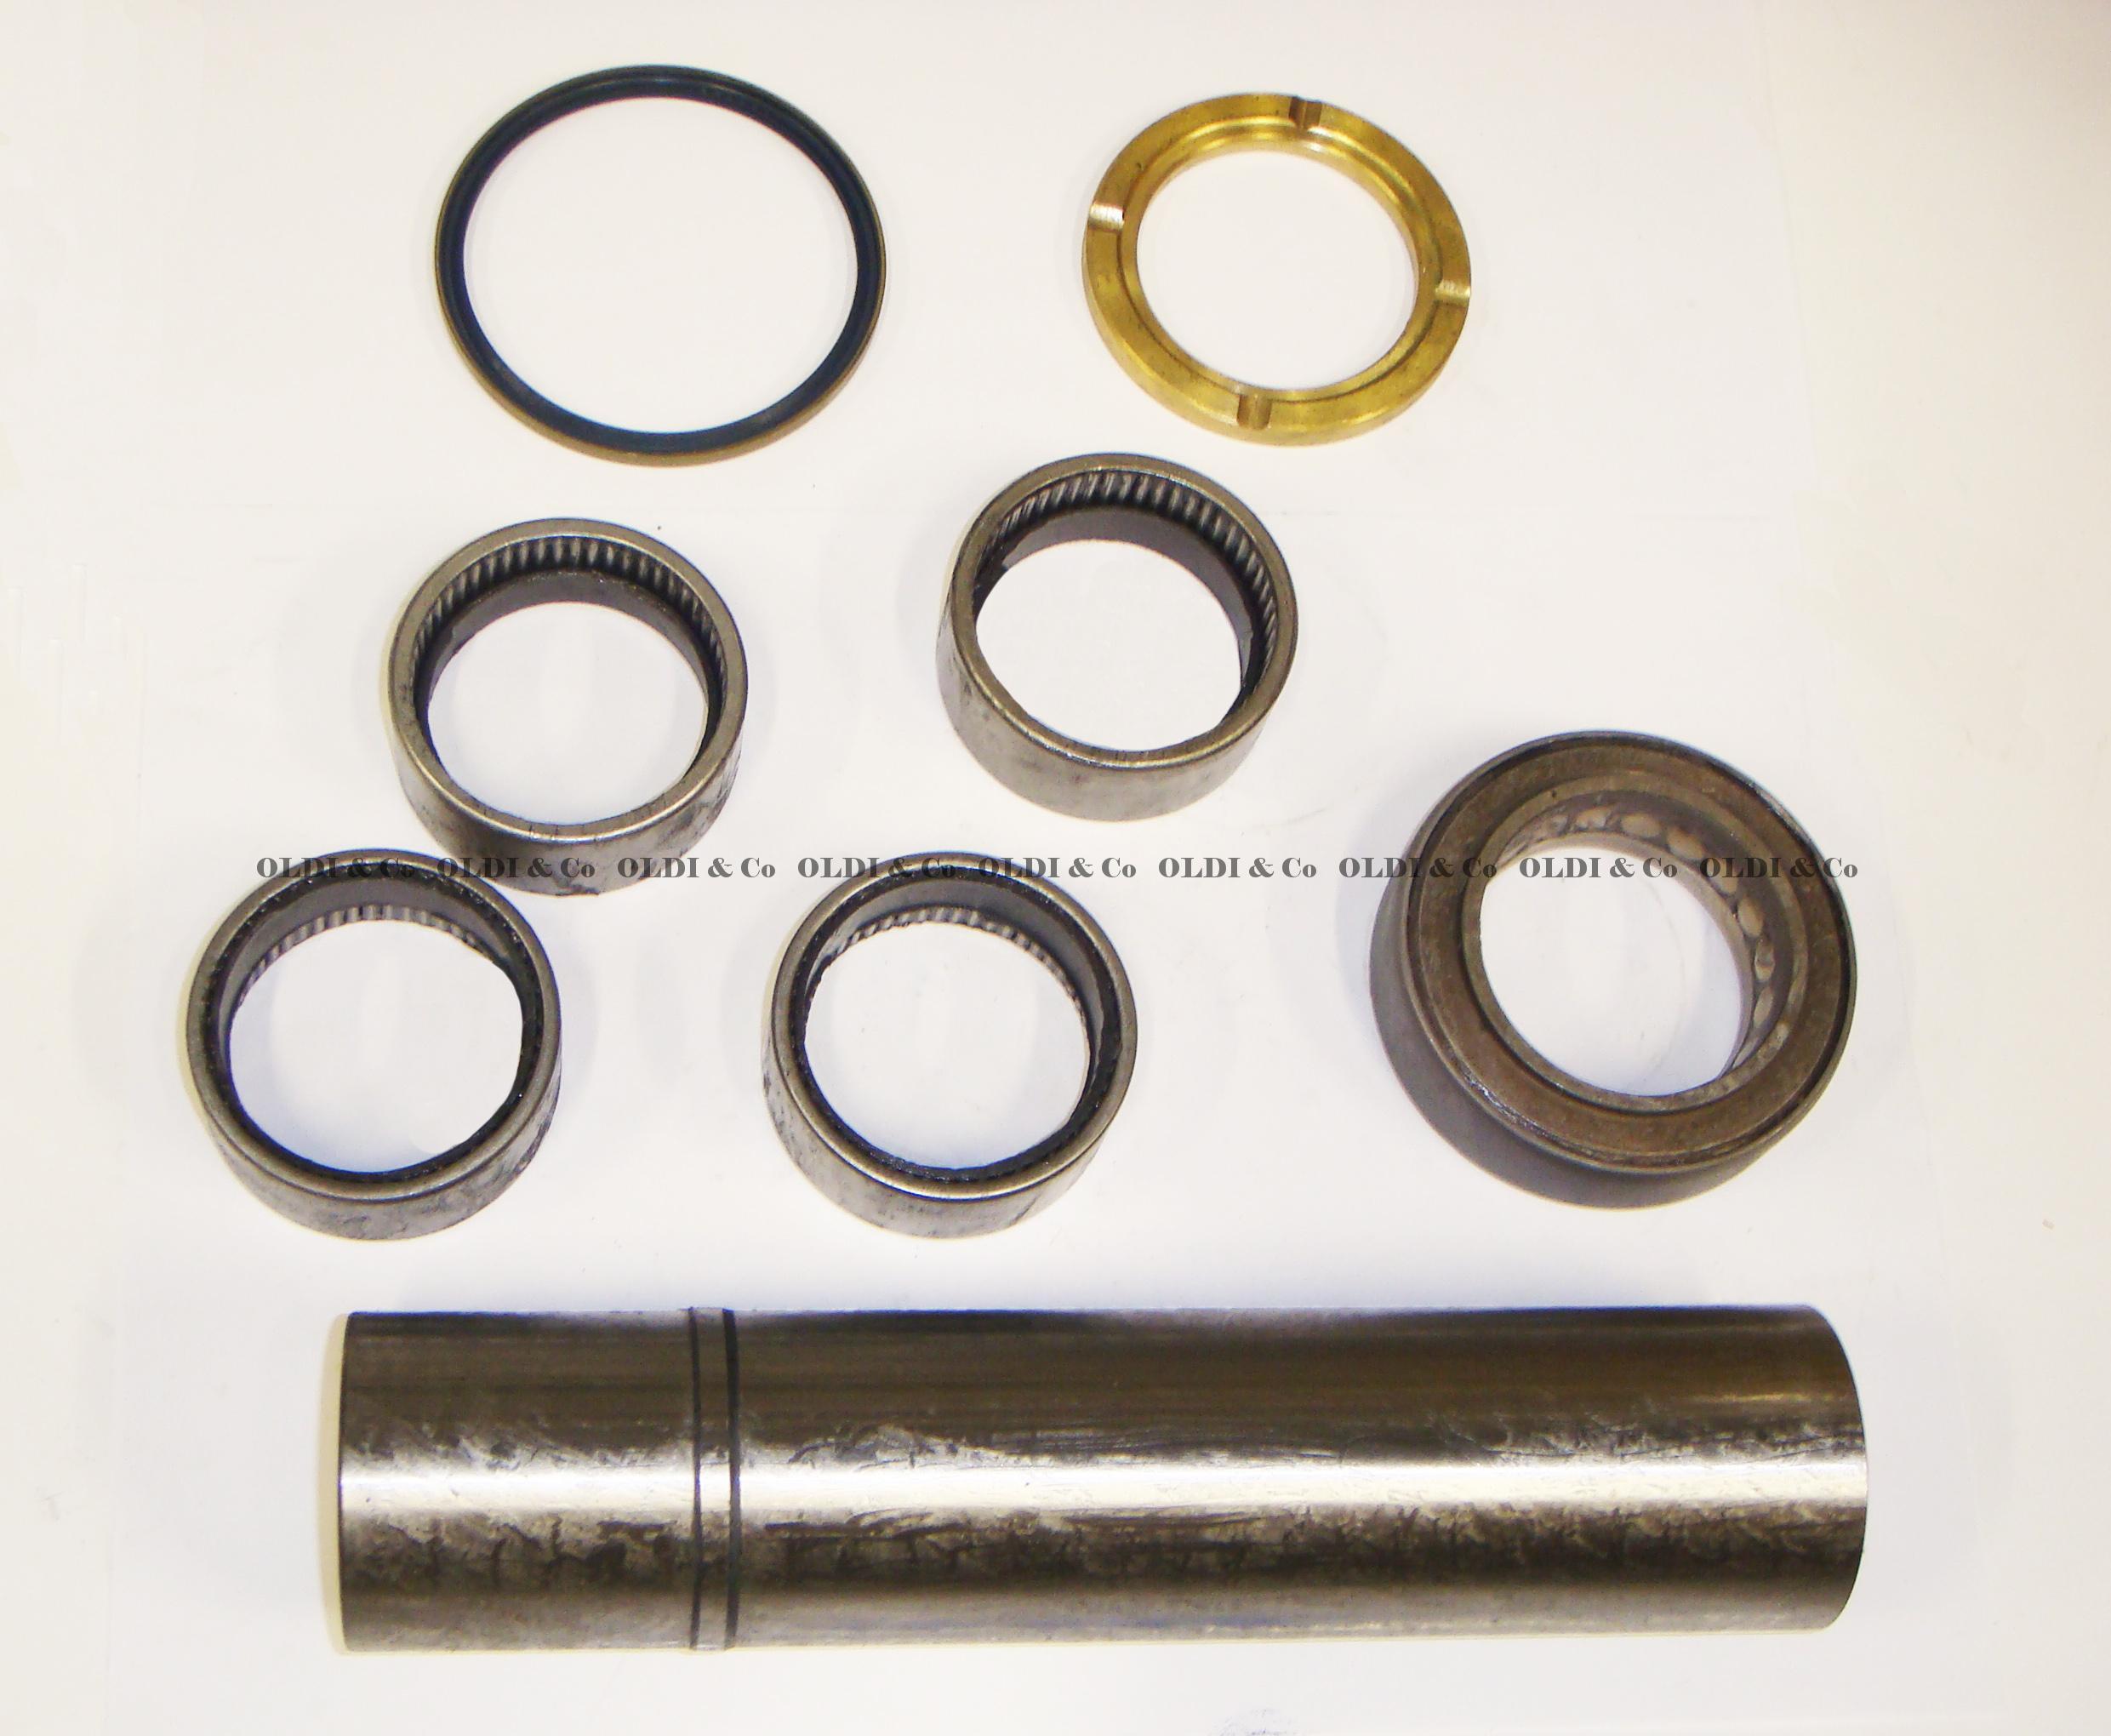 34.074.17419 Suspension parts → King pin - steering knuckle rep. kit